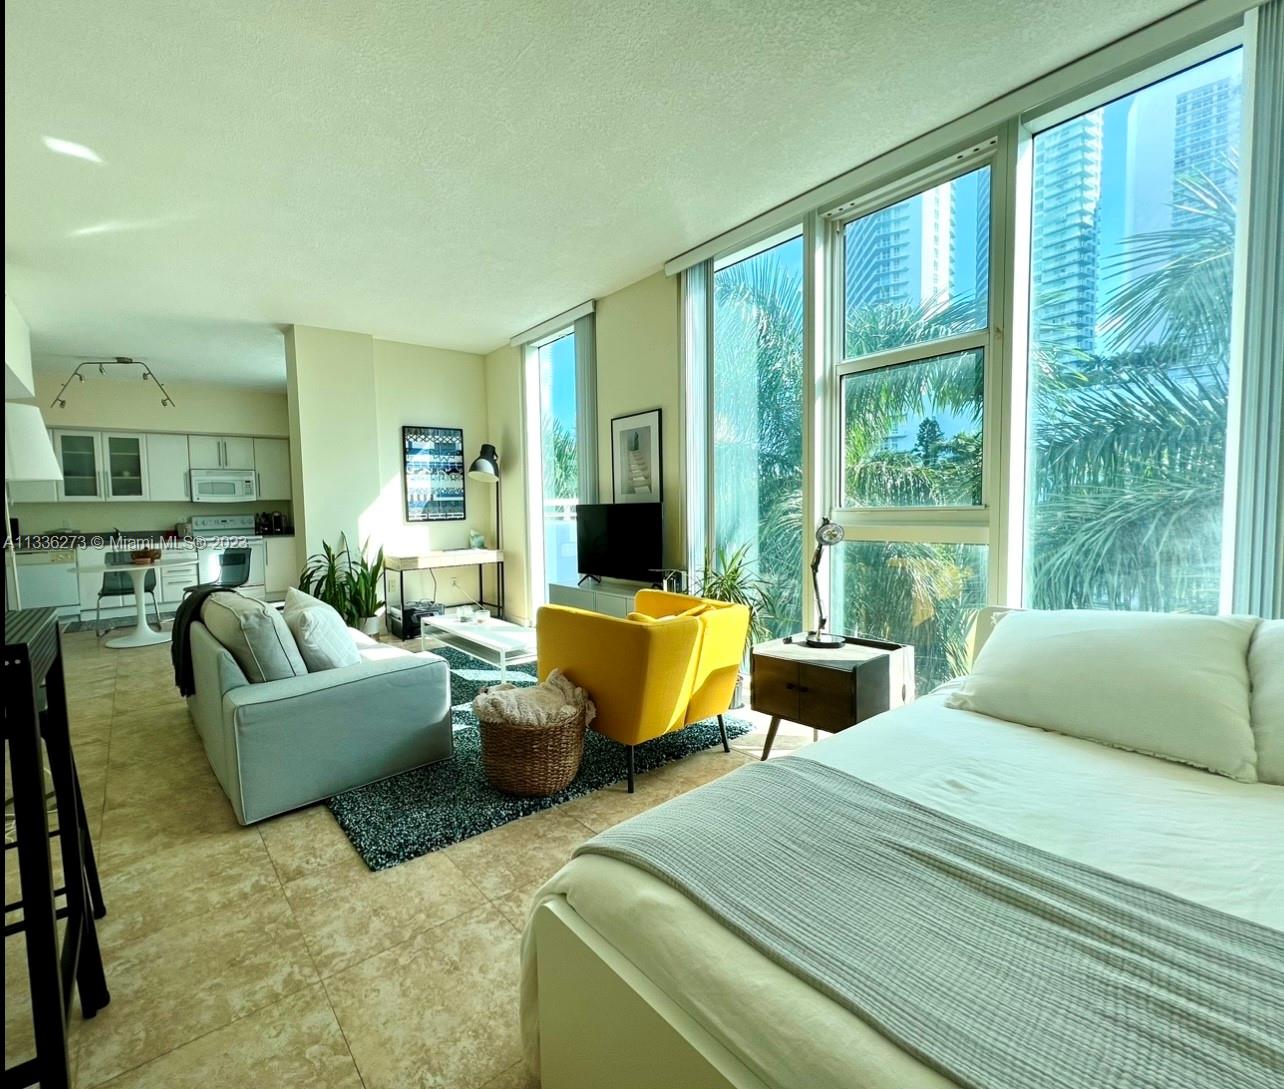 Very comfortable studio feels like 1 bedroom, perfectly located in the Edgewater district. Walking distance to restaurants, grocery stores, metro mover, etc. The unit has lots of natural light, full kitchen, washer and dryer in the unit, 1 assigned parking space, tons of additional parking on the street. 1800 Biscayne offers great gym, pool area, a party room. Need 24HR notice to show.